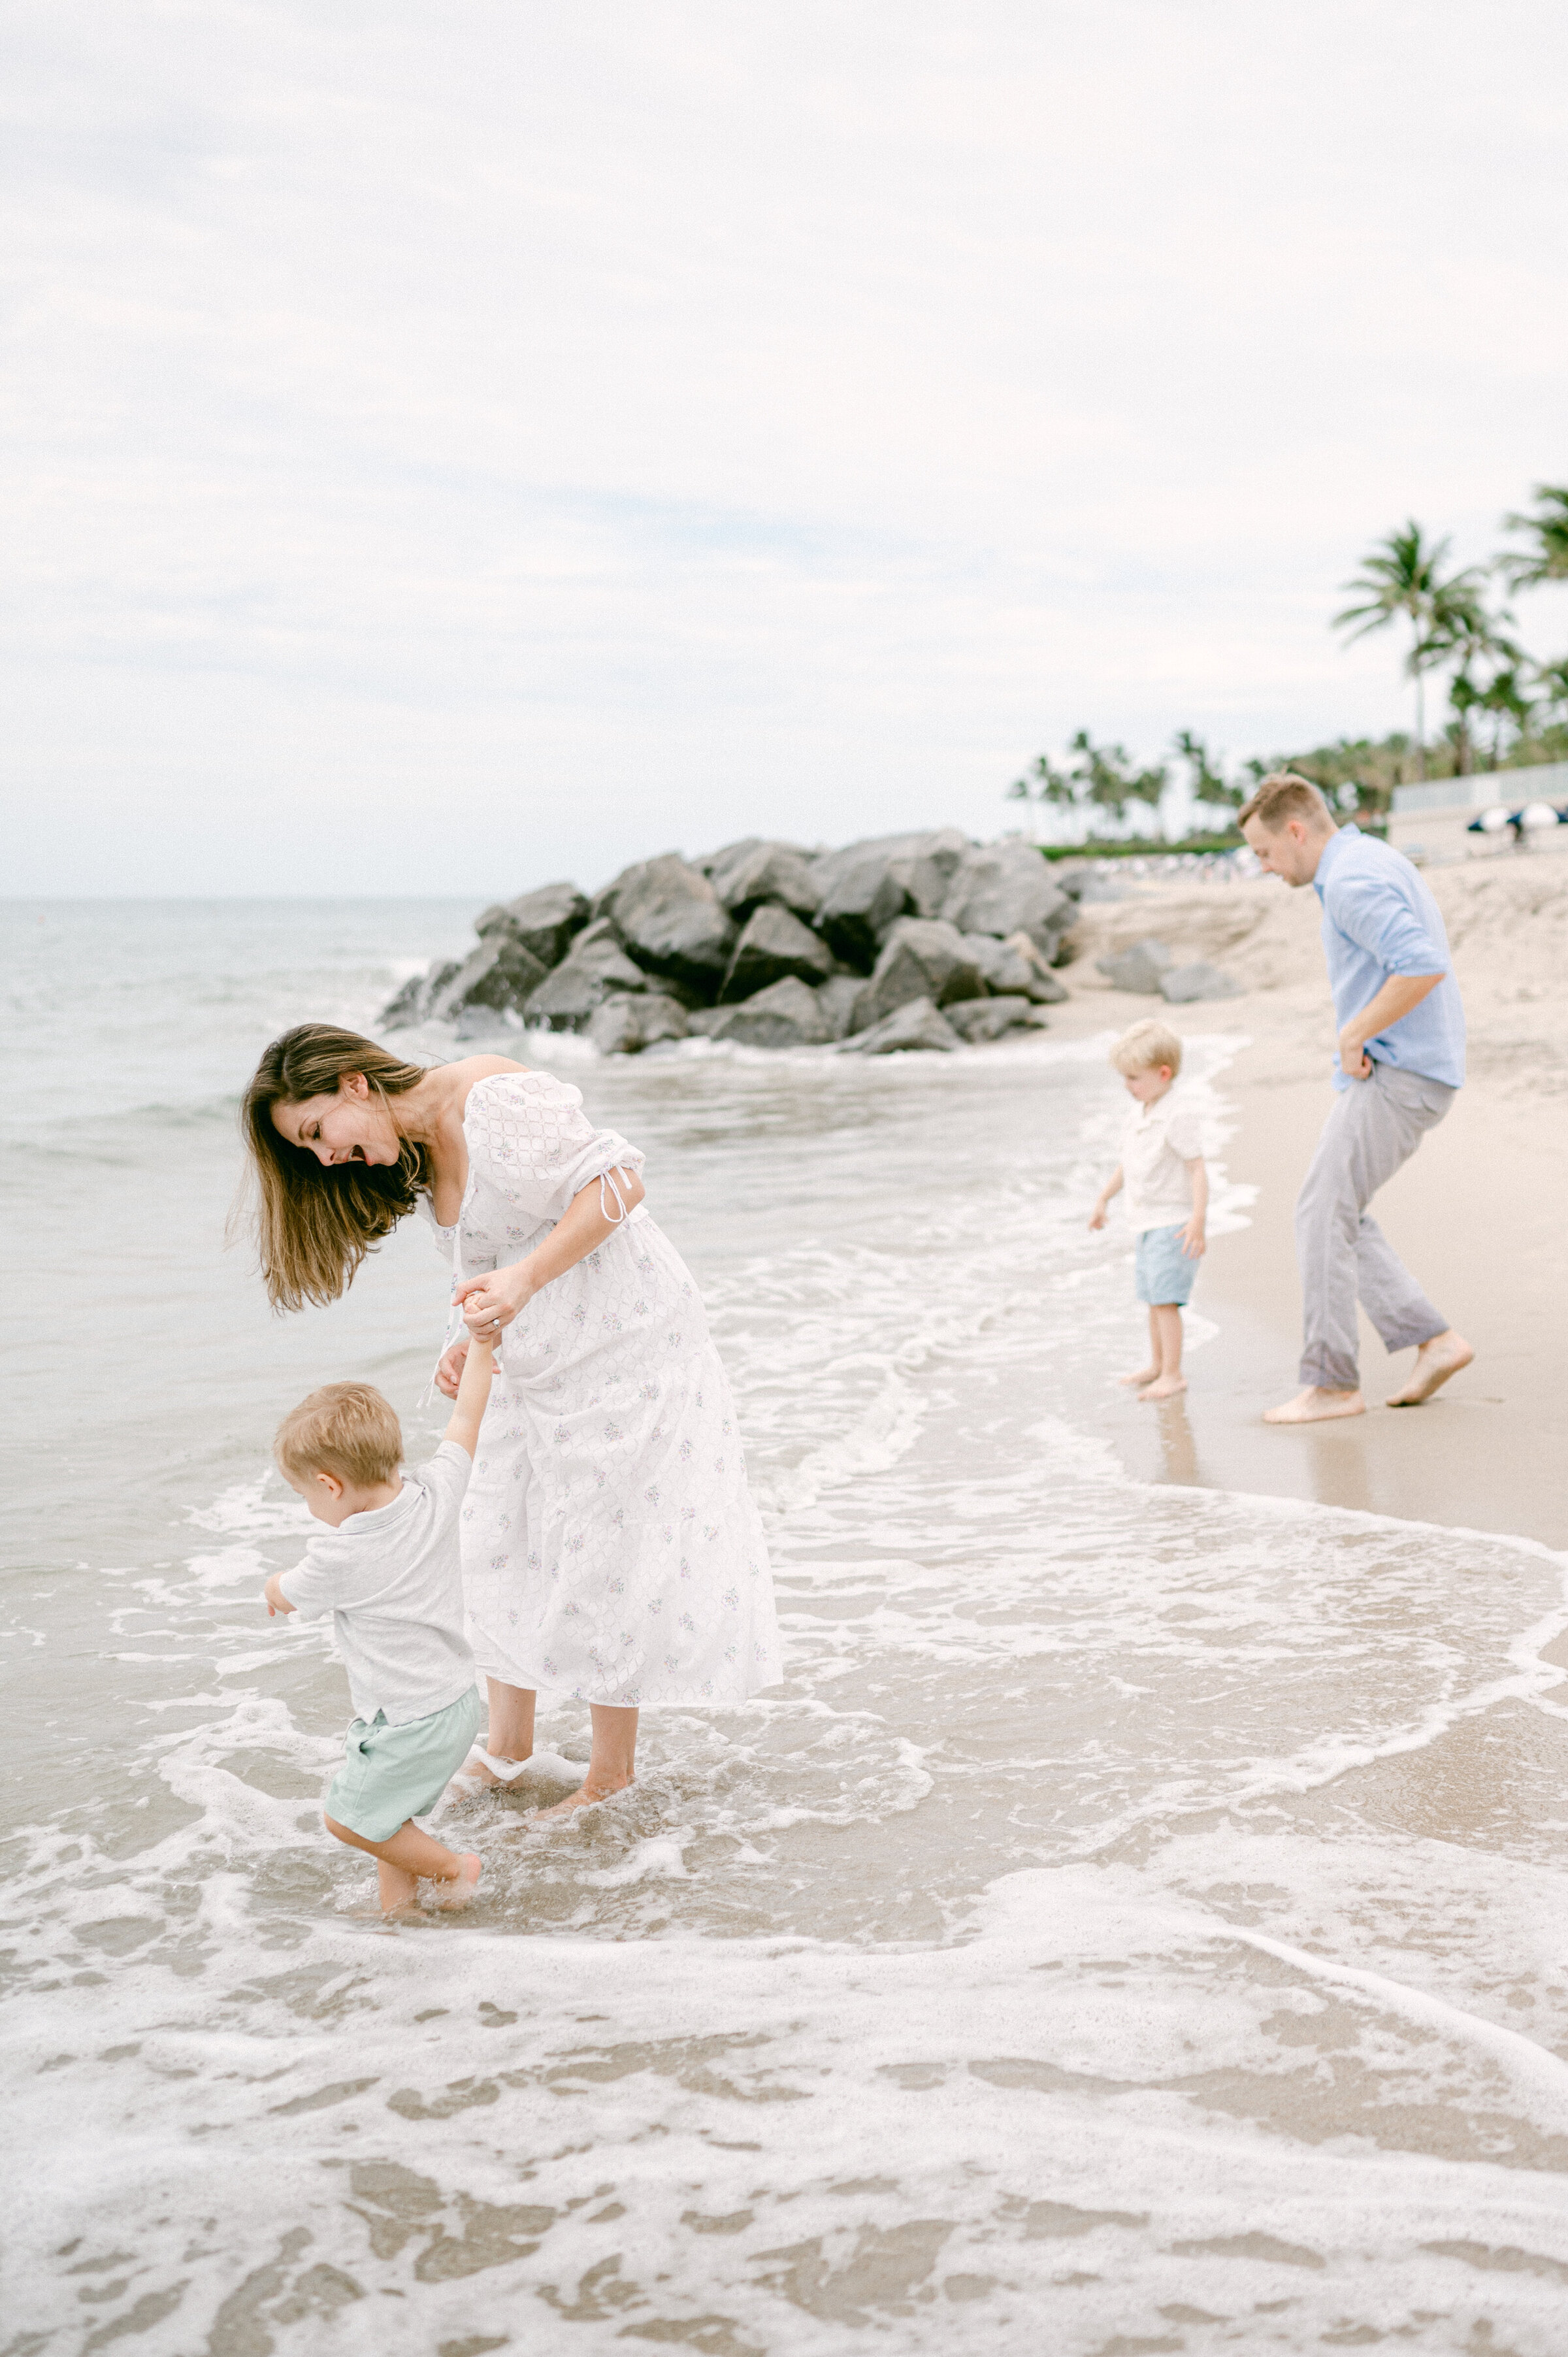 Family of 4 playing on the beach